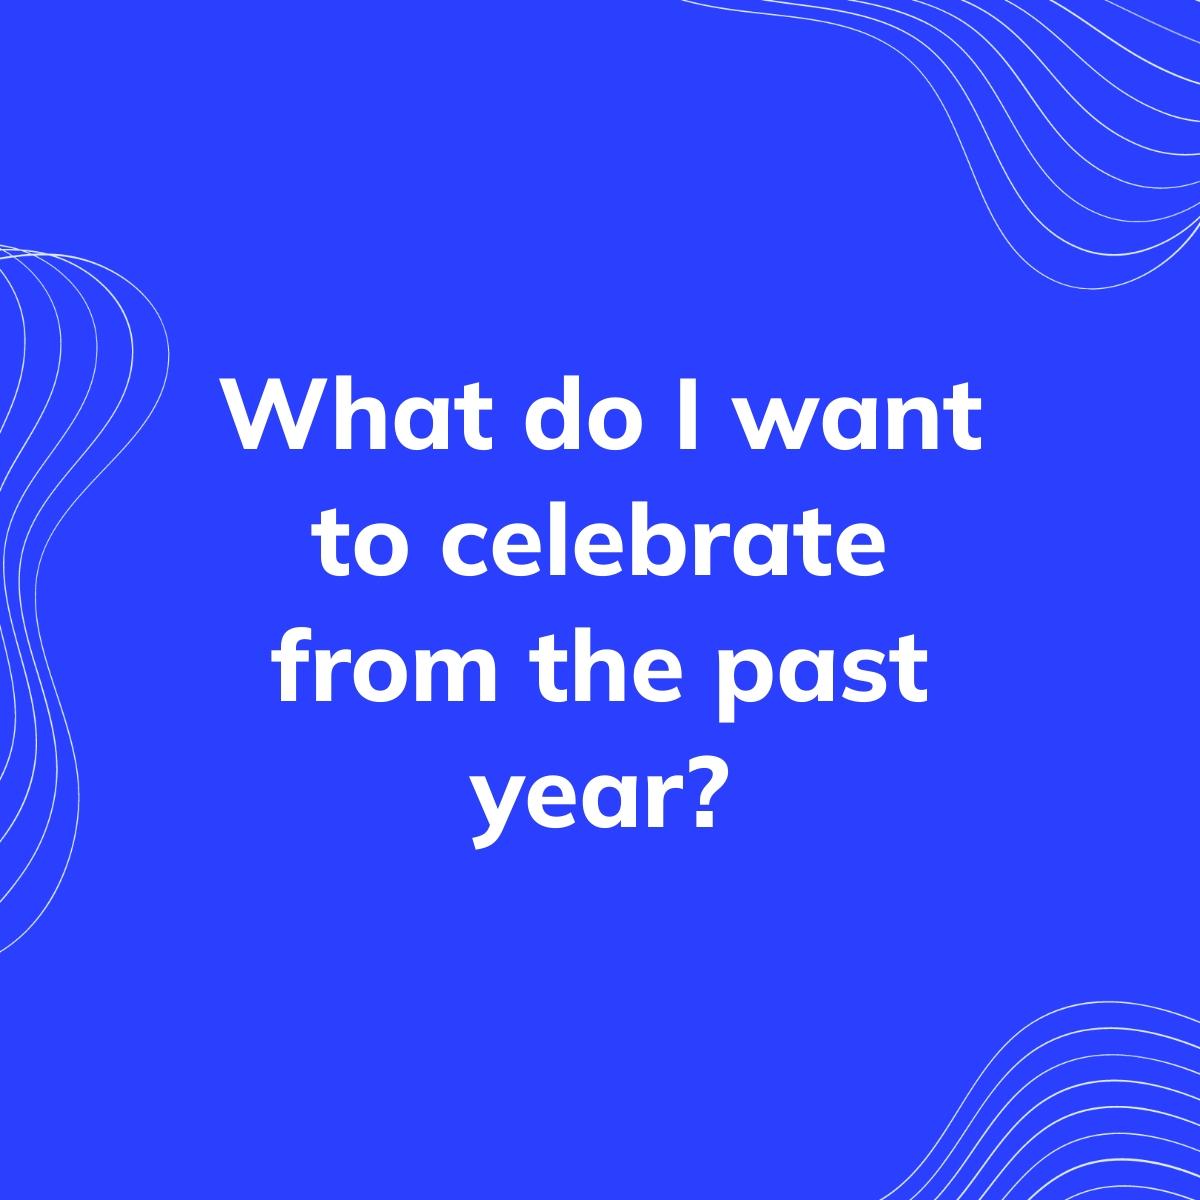 Journal Prompt: What do I want to celebrate from the past year?